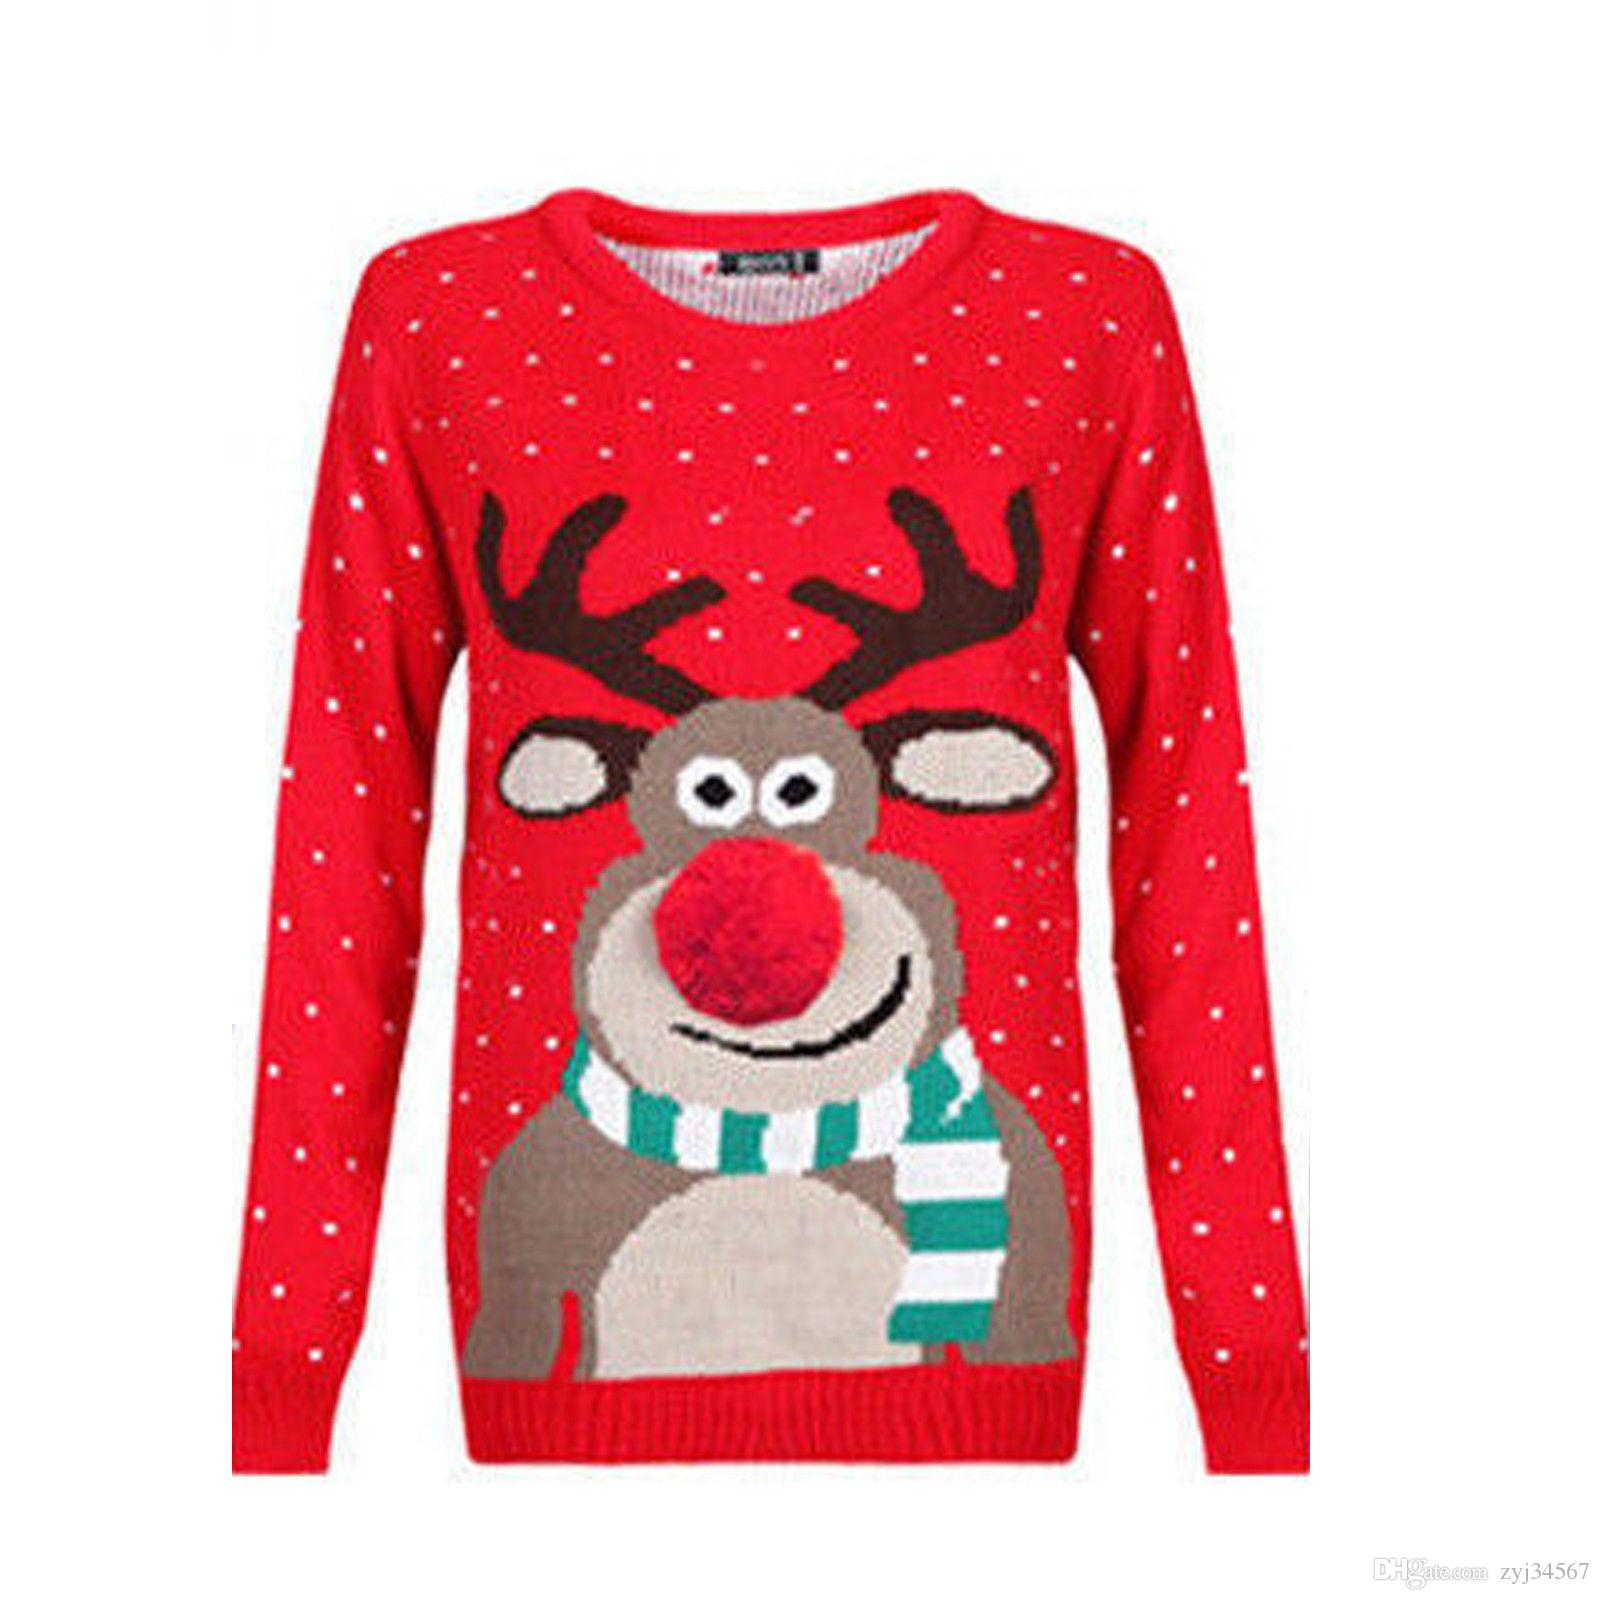 Retro Christmas Jumper Knitting Patterns Seoproductname